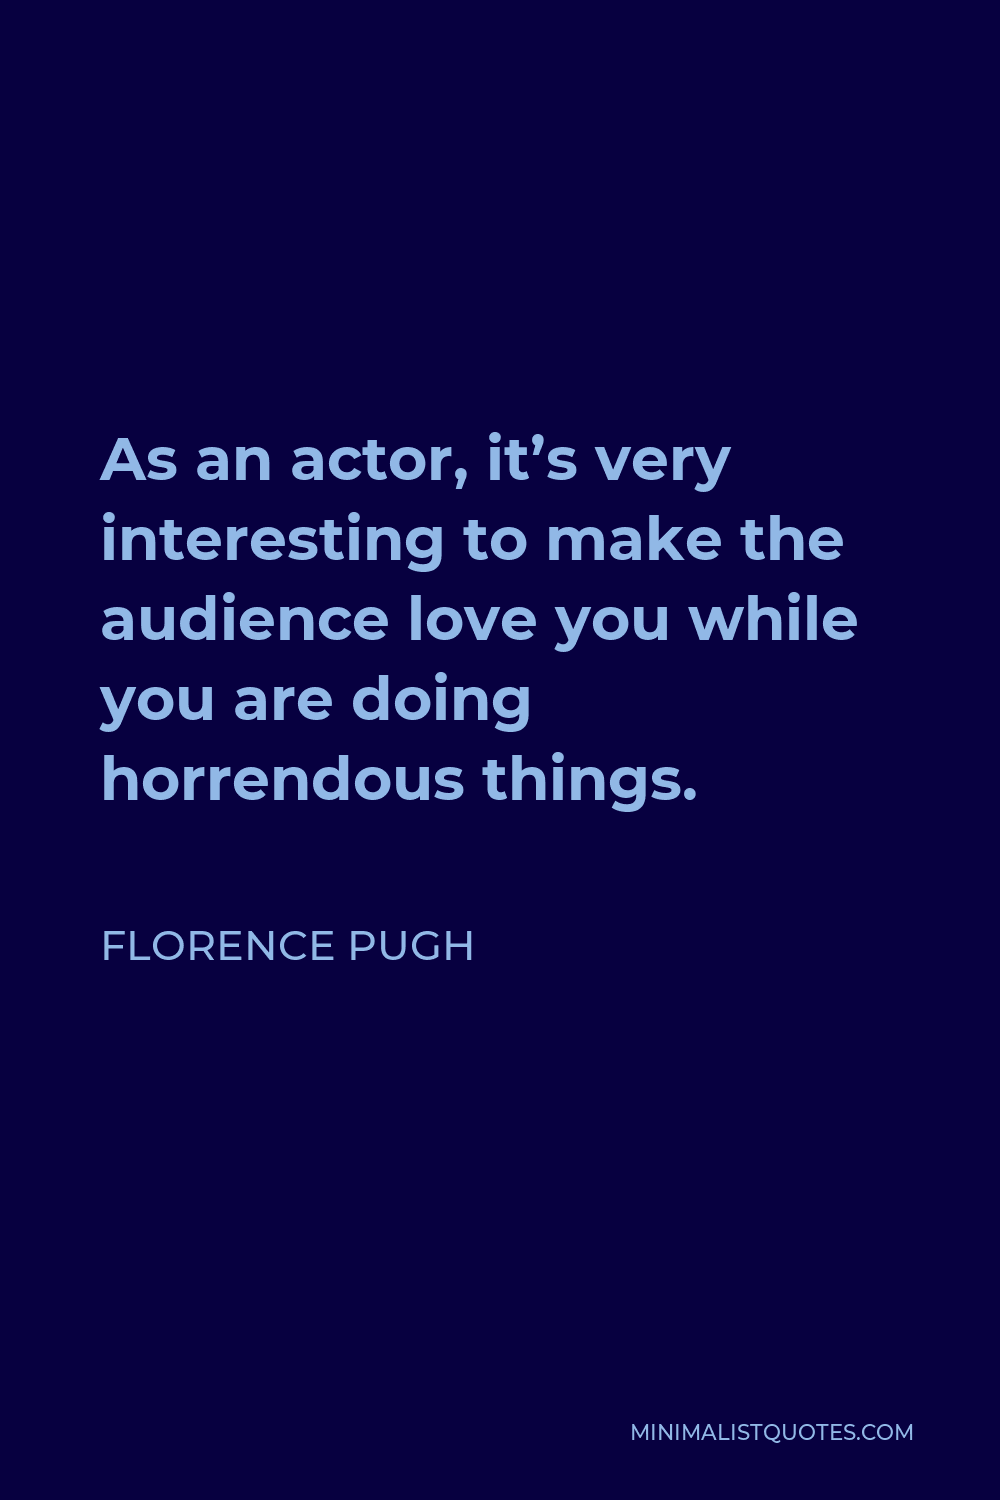 Florence Pugh Quote - As an actor, it’s very interesting to make the audience love you while you are doing horrendous things.